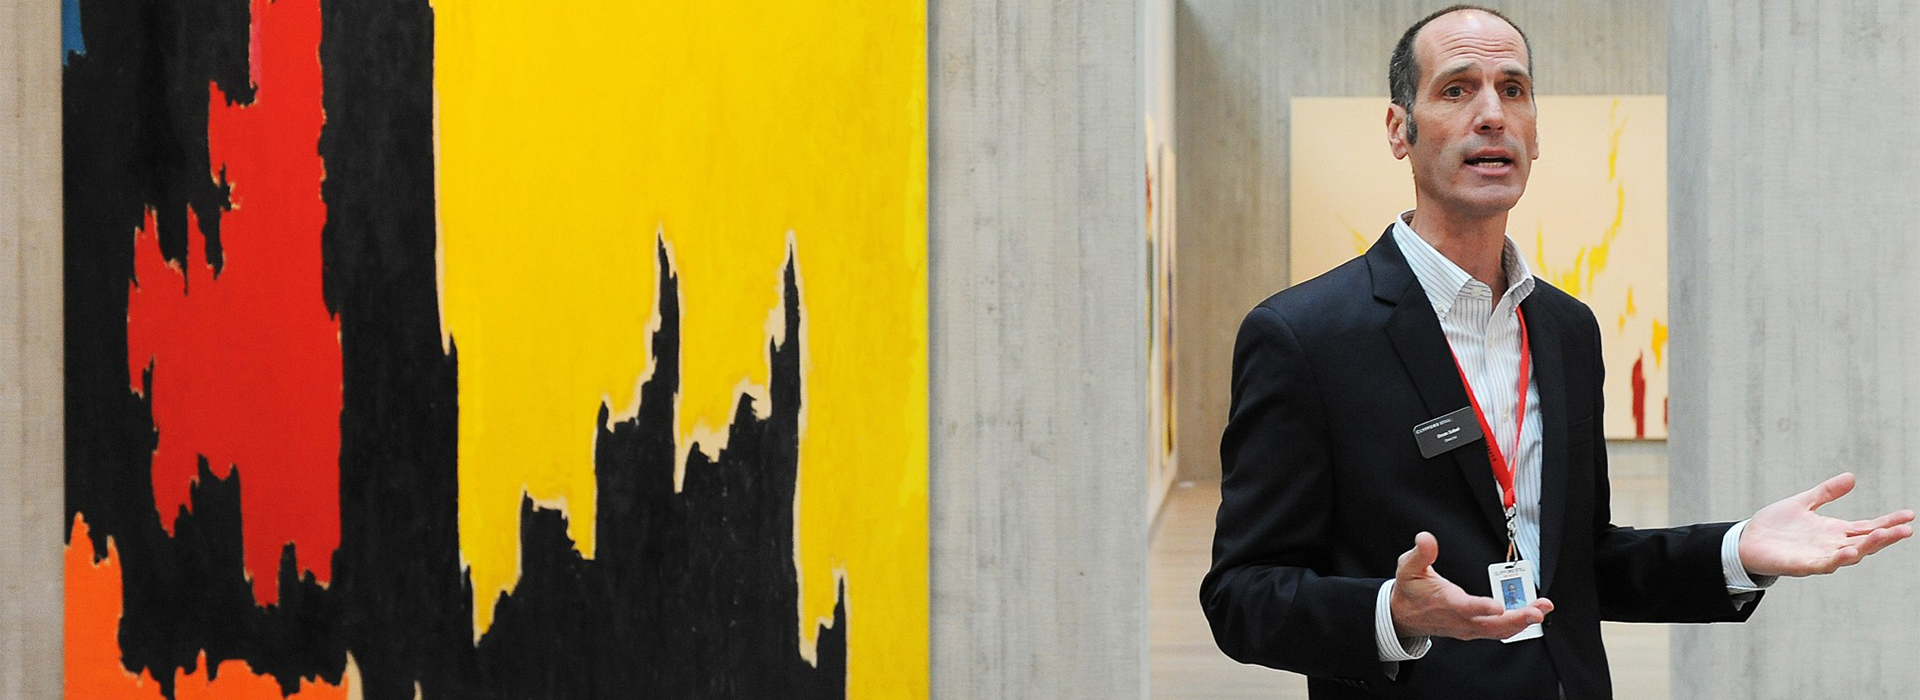 Man stands in a gallery at the Clyfford Still Museum